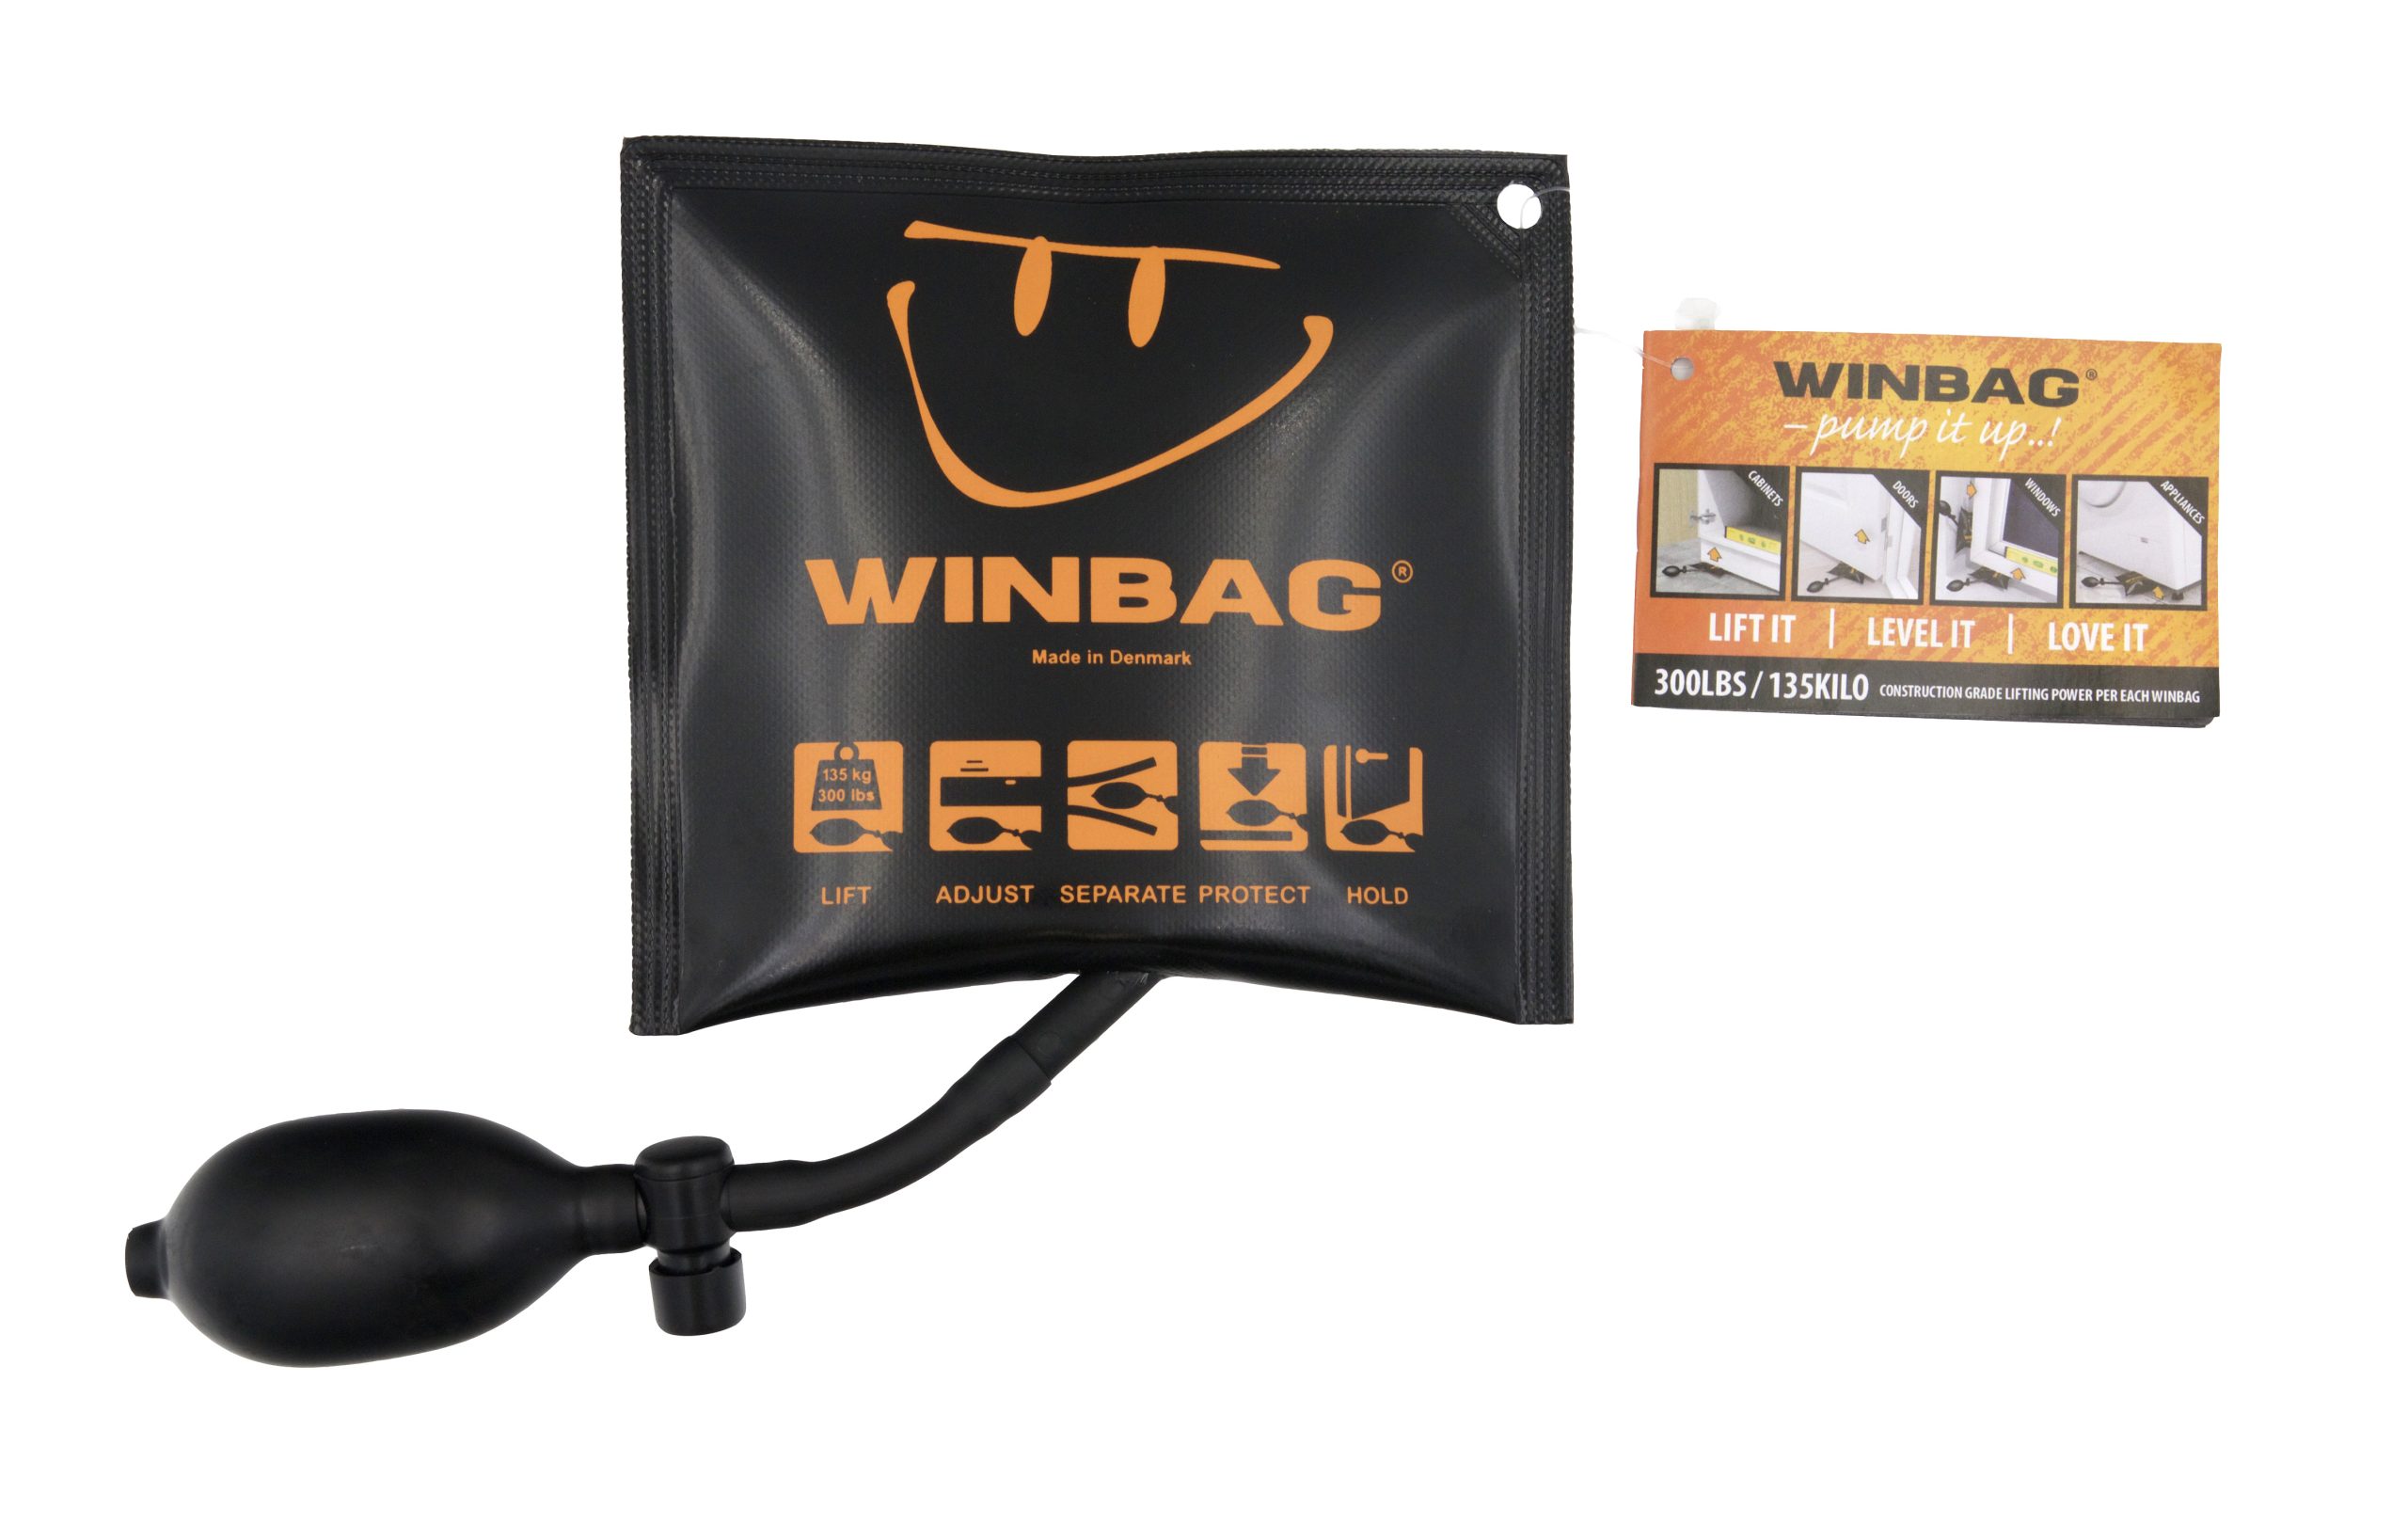 Winbag – Lifting and Leveling Tool – Nelson Wood Shims